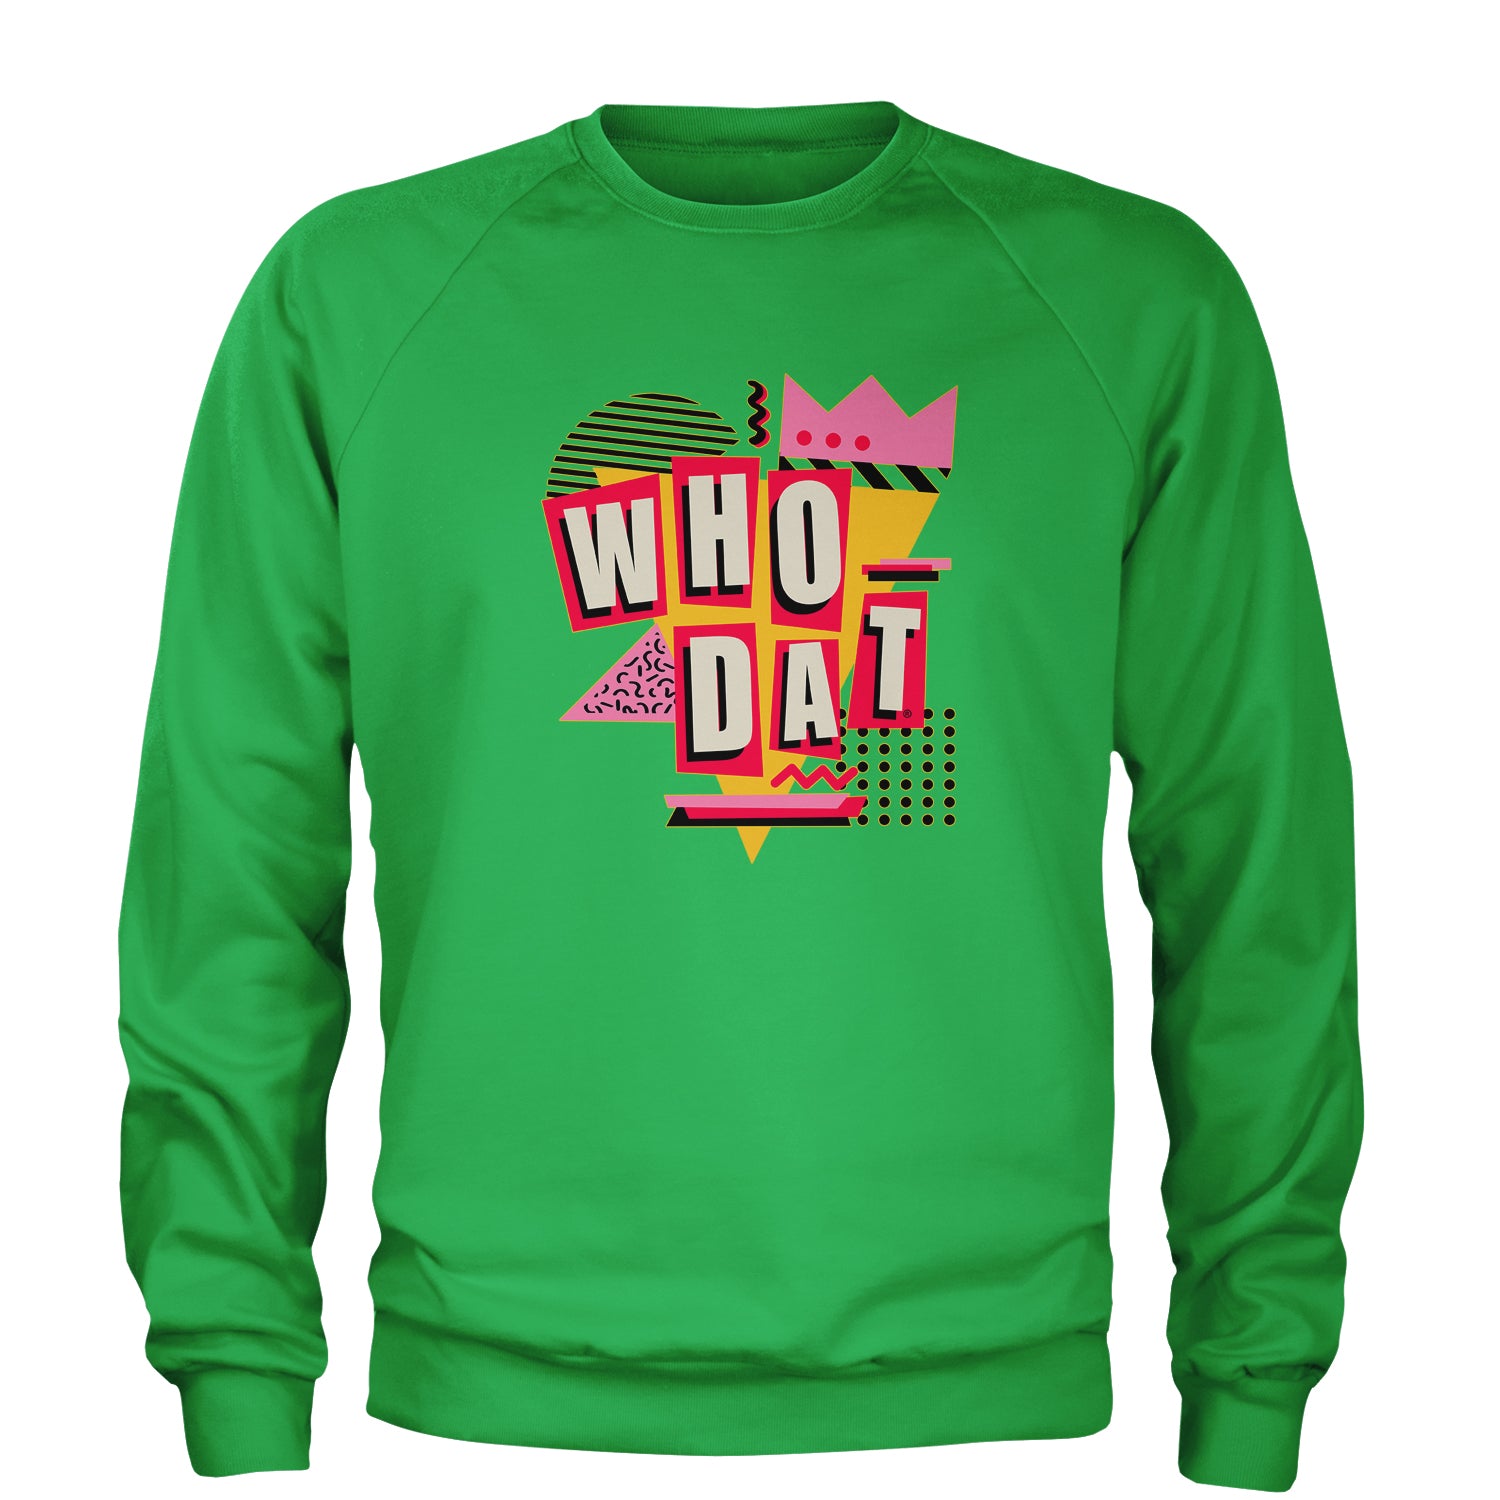 Who Dat New Orleans Adult Crewneck Sweatshirt brees, colston, drew, louisiana, marques, payton, sean by Expression Tees